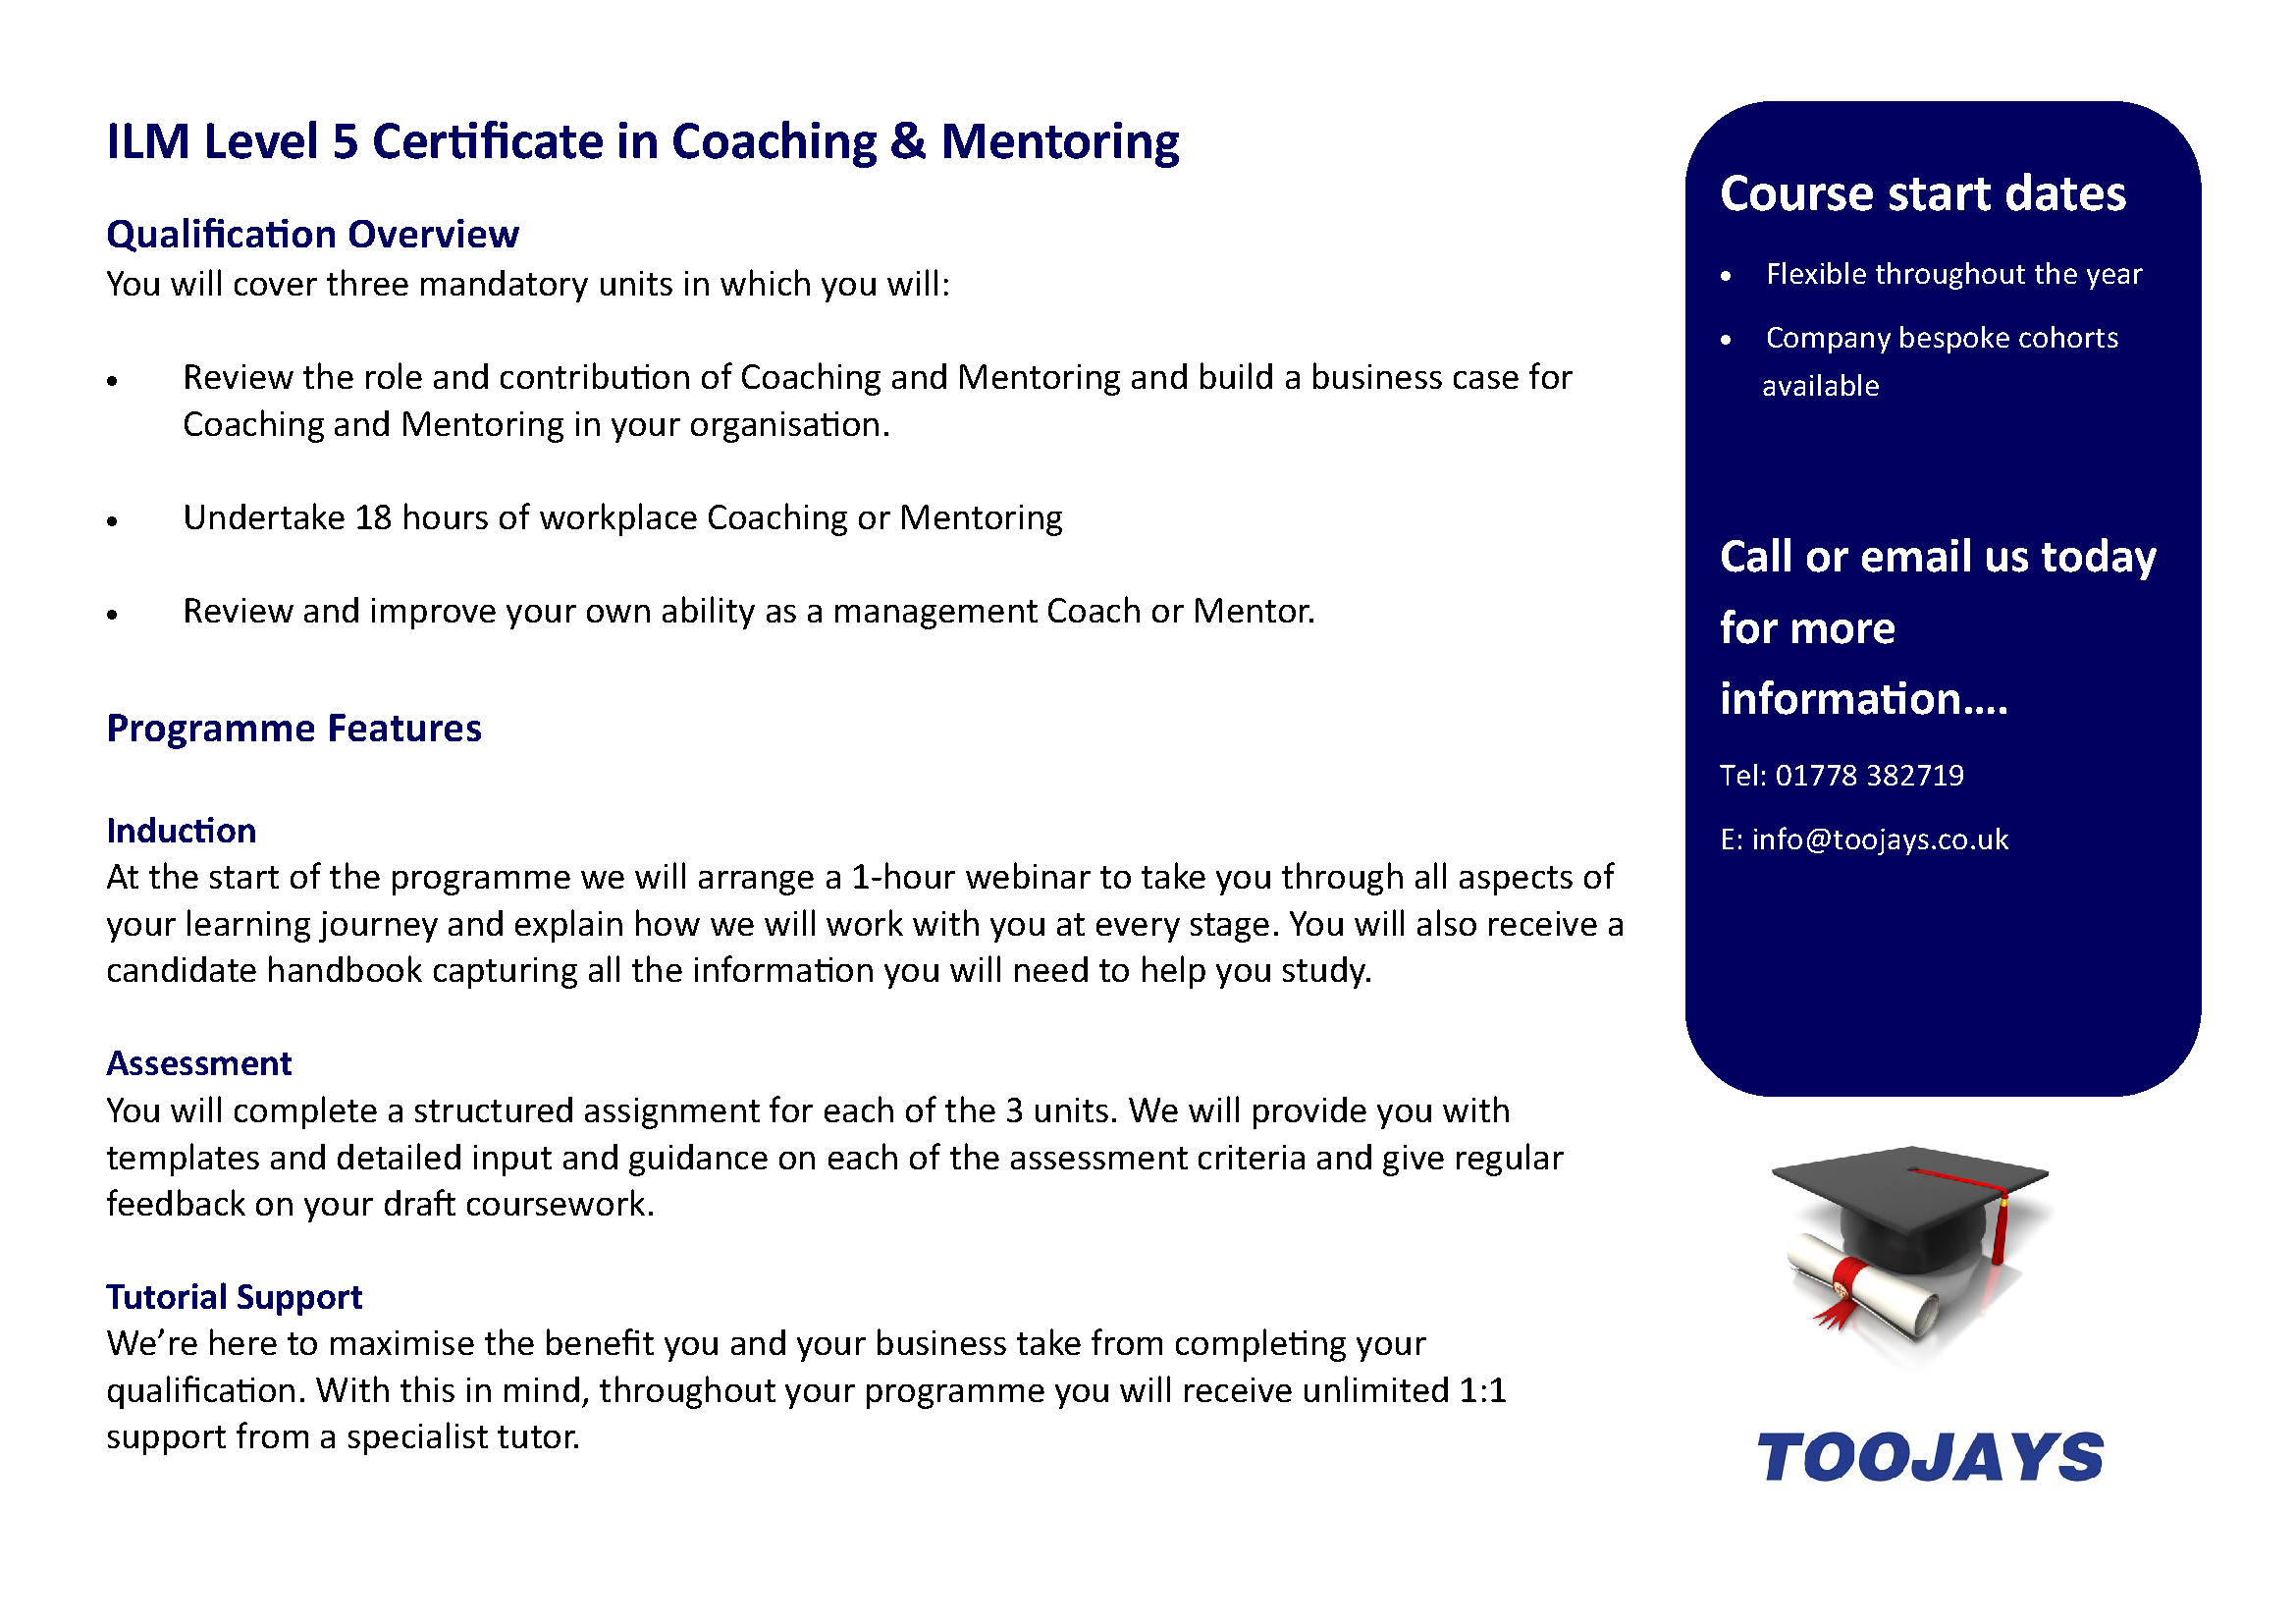 ILM Level 5 Certificate in Coaching and Mentoring